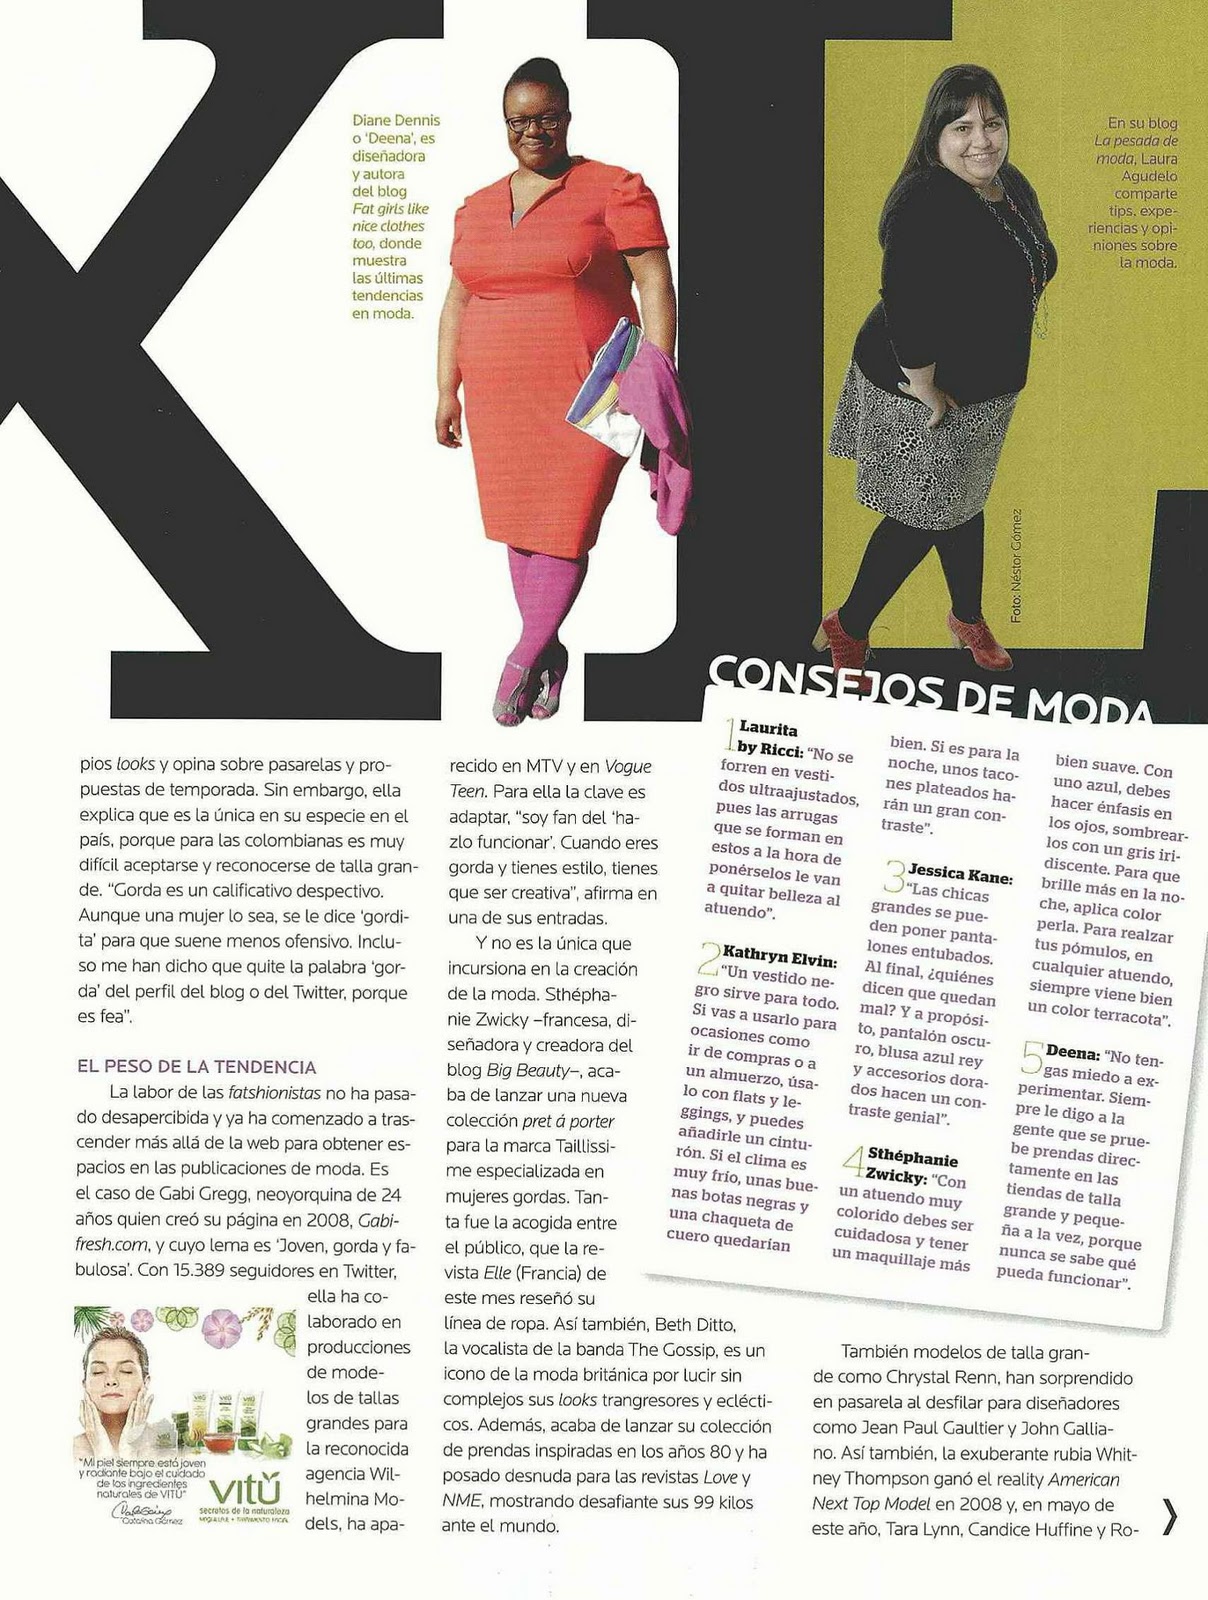 Featured in Carrusel Magazine of El Tiempo - Life and Style of Jessica Kane